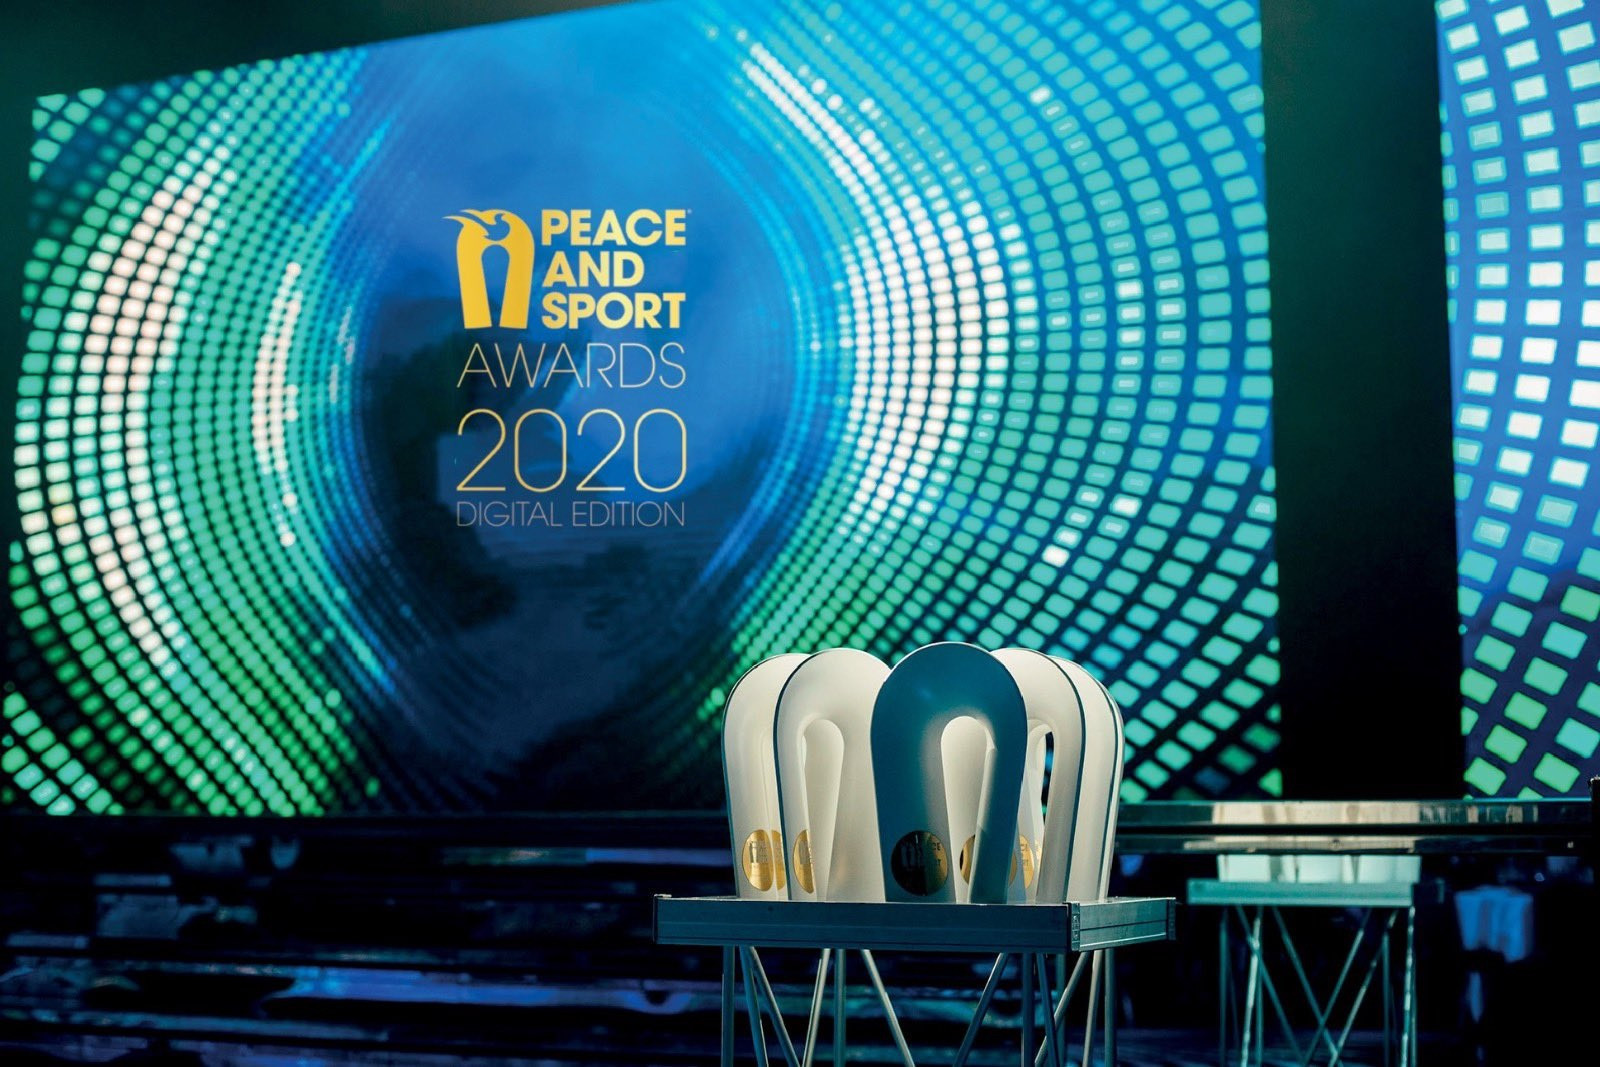 FIAS Online Sambo Cup in running for prize at 2020 Peace and Sport Awards